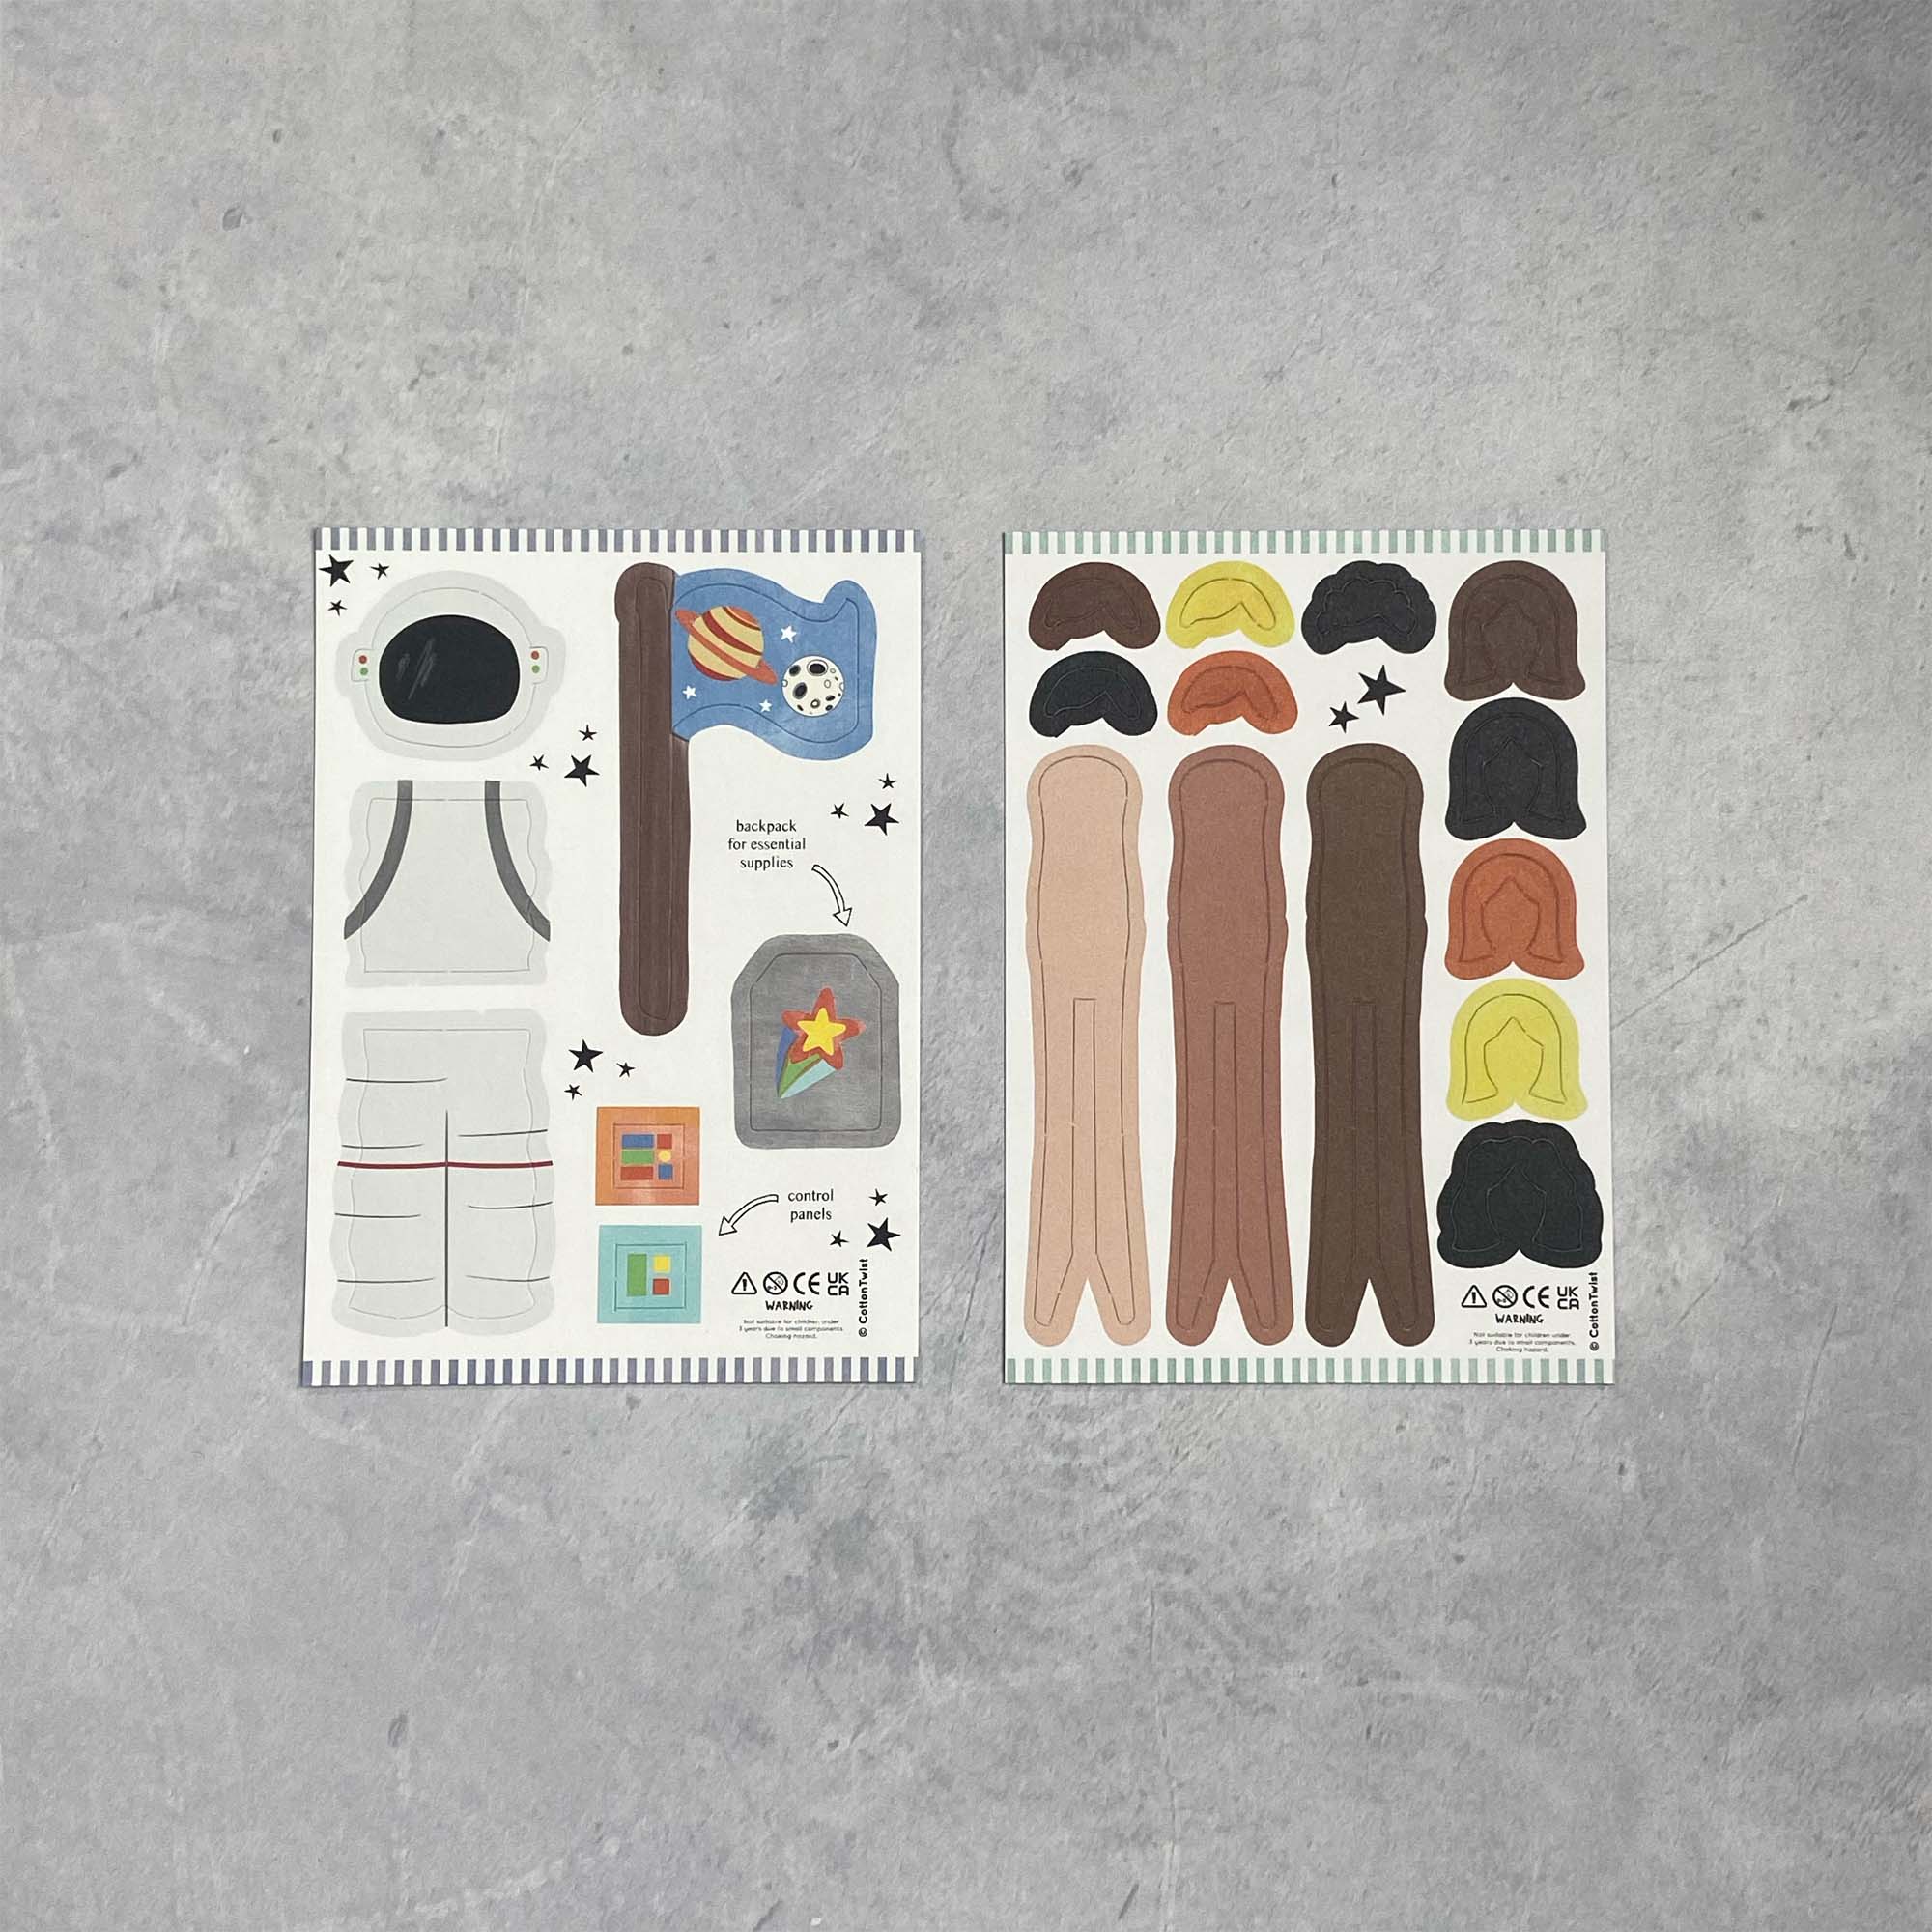 Make Your Own Astronaut Peg Doll Kit